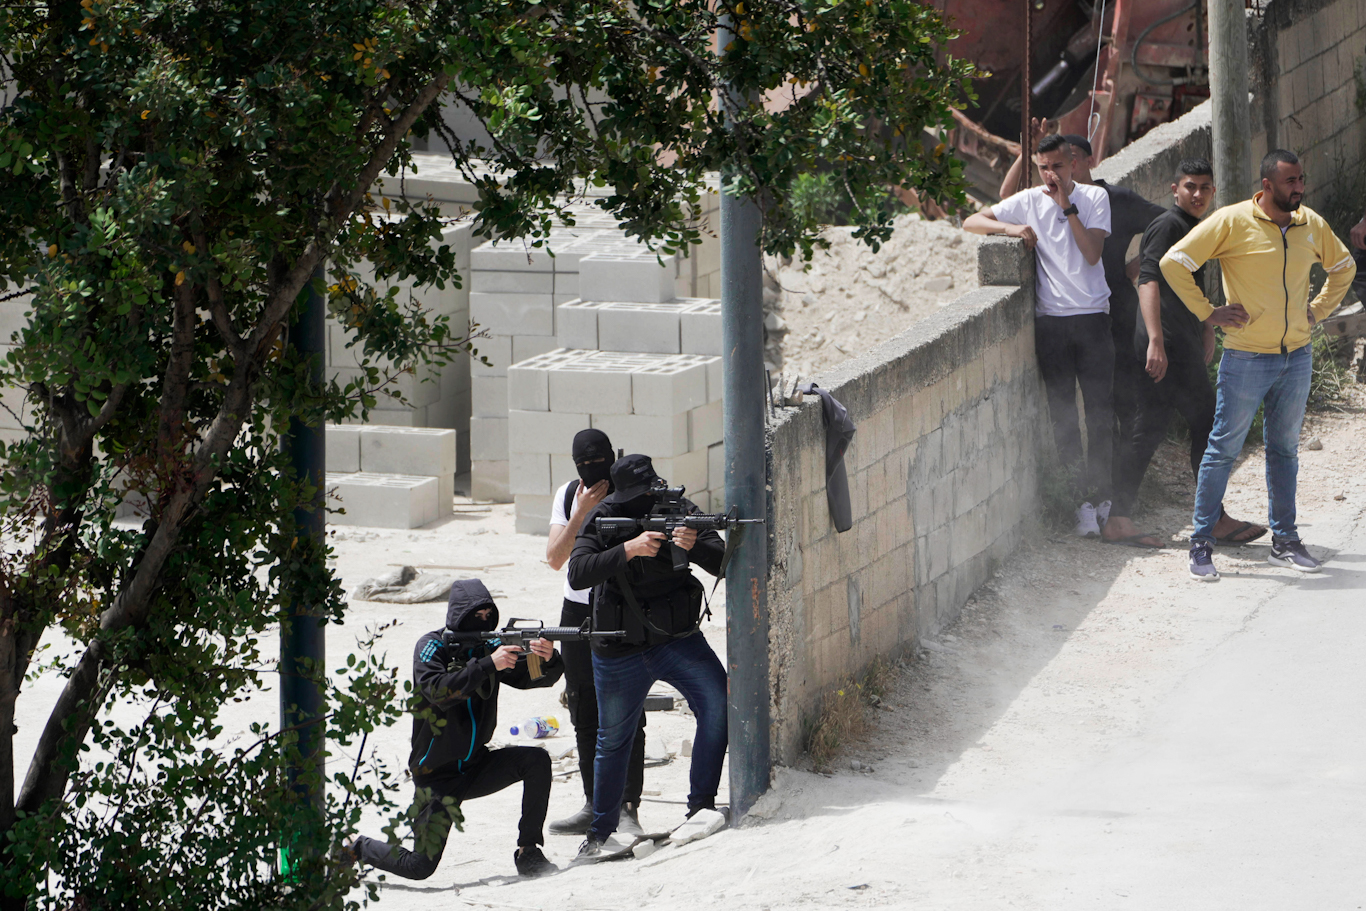 Palestinian youth aim weapons